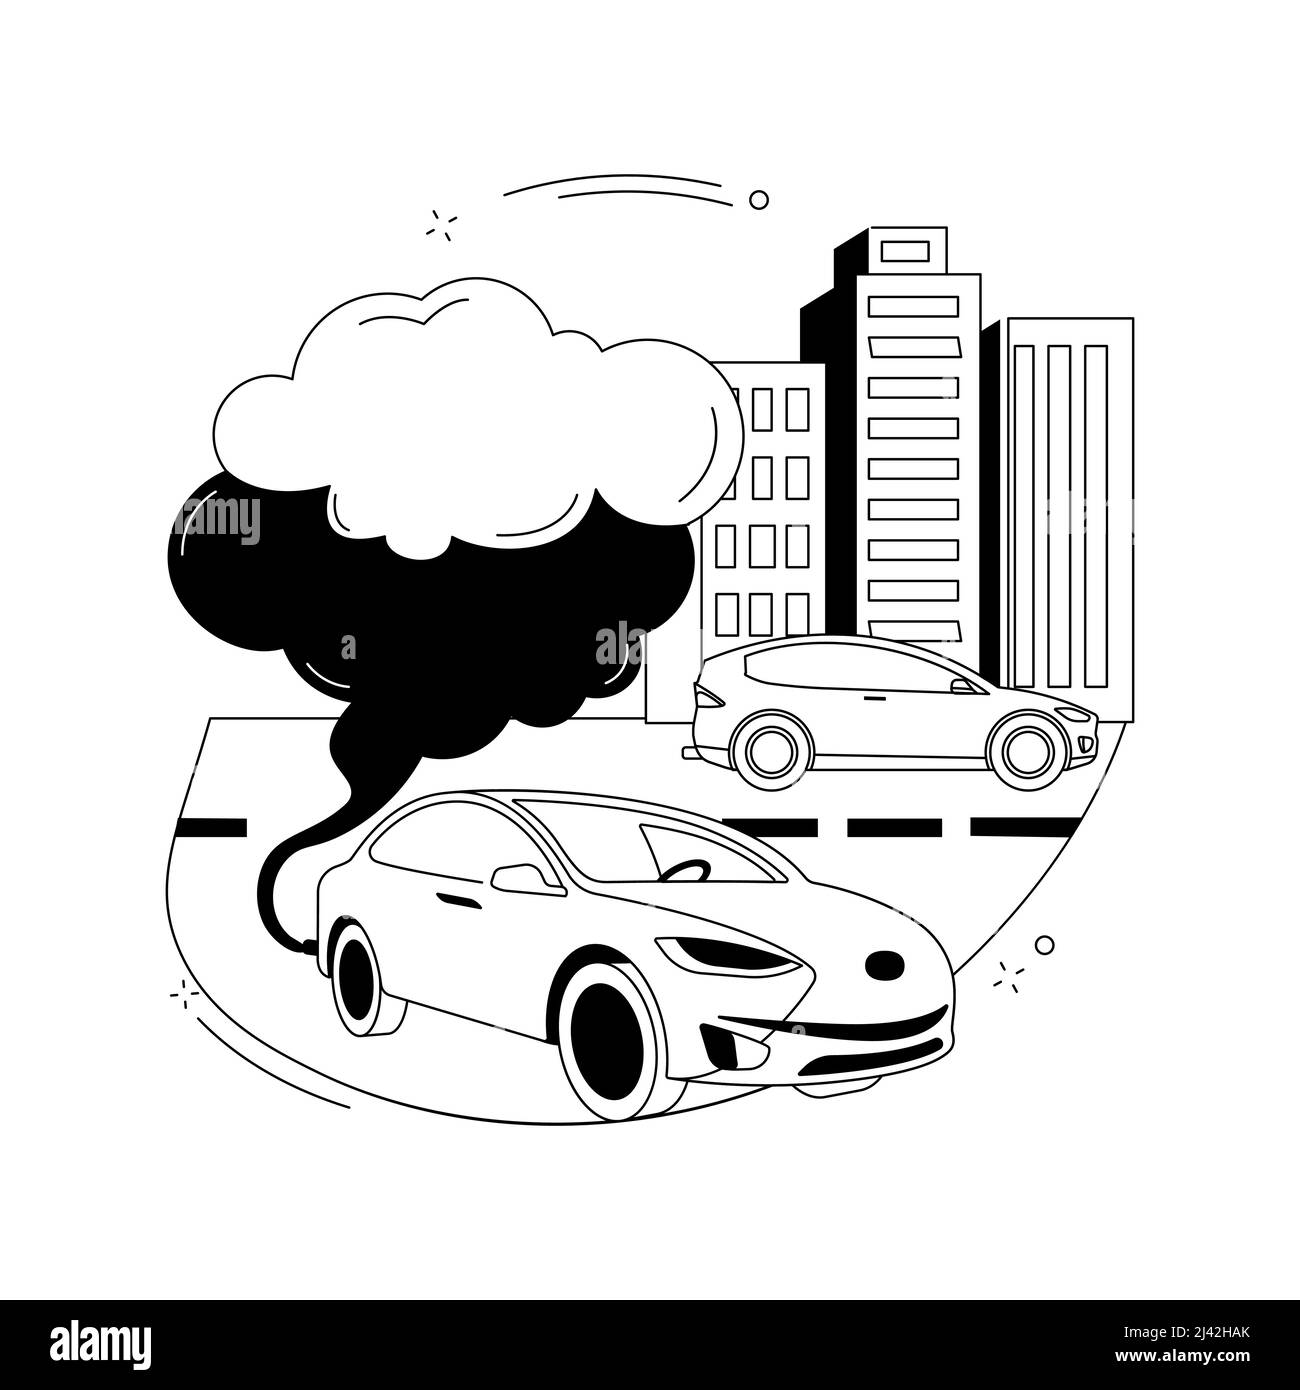 Motor vehicle pollution abstract concept vector illustration. Pollution certificate, motor vehicle emission reduction, car exhaust, transportation ind Stock Vector